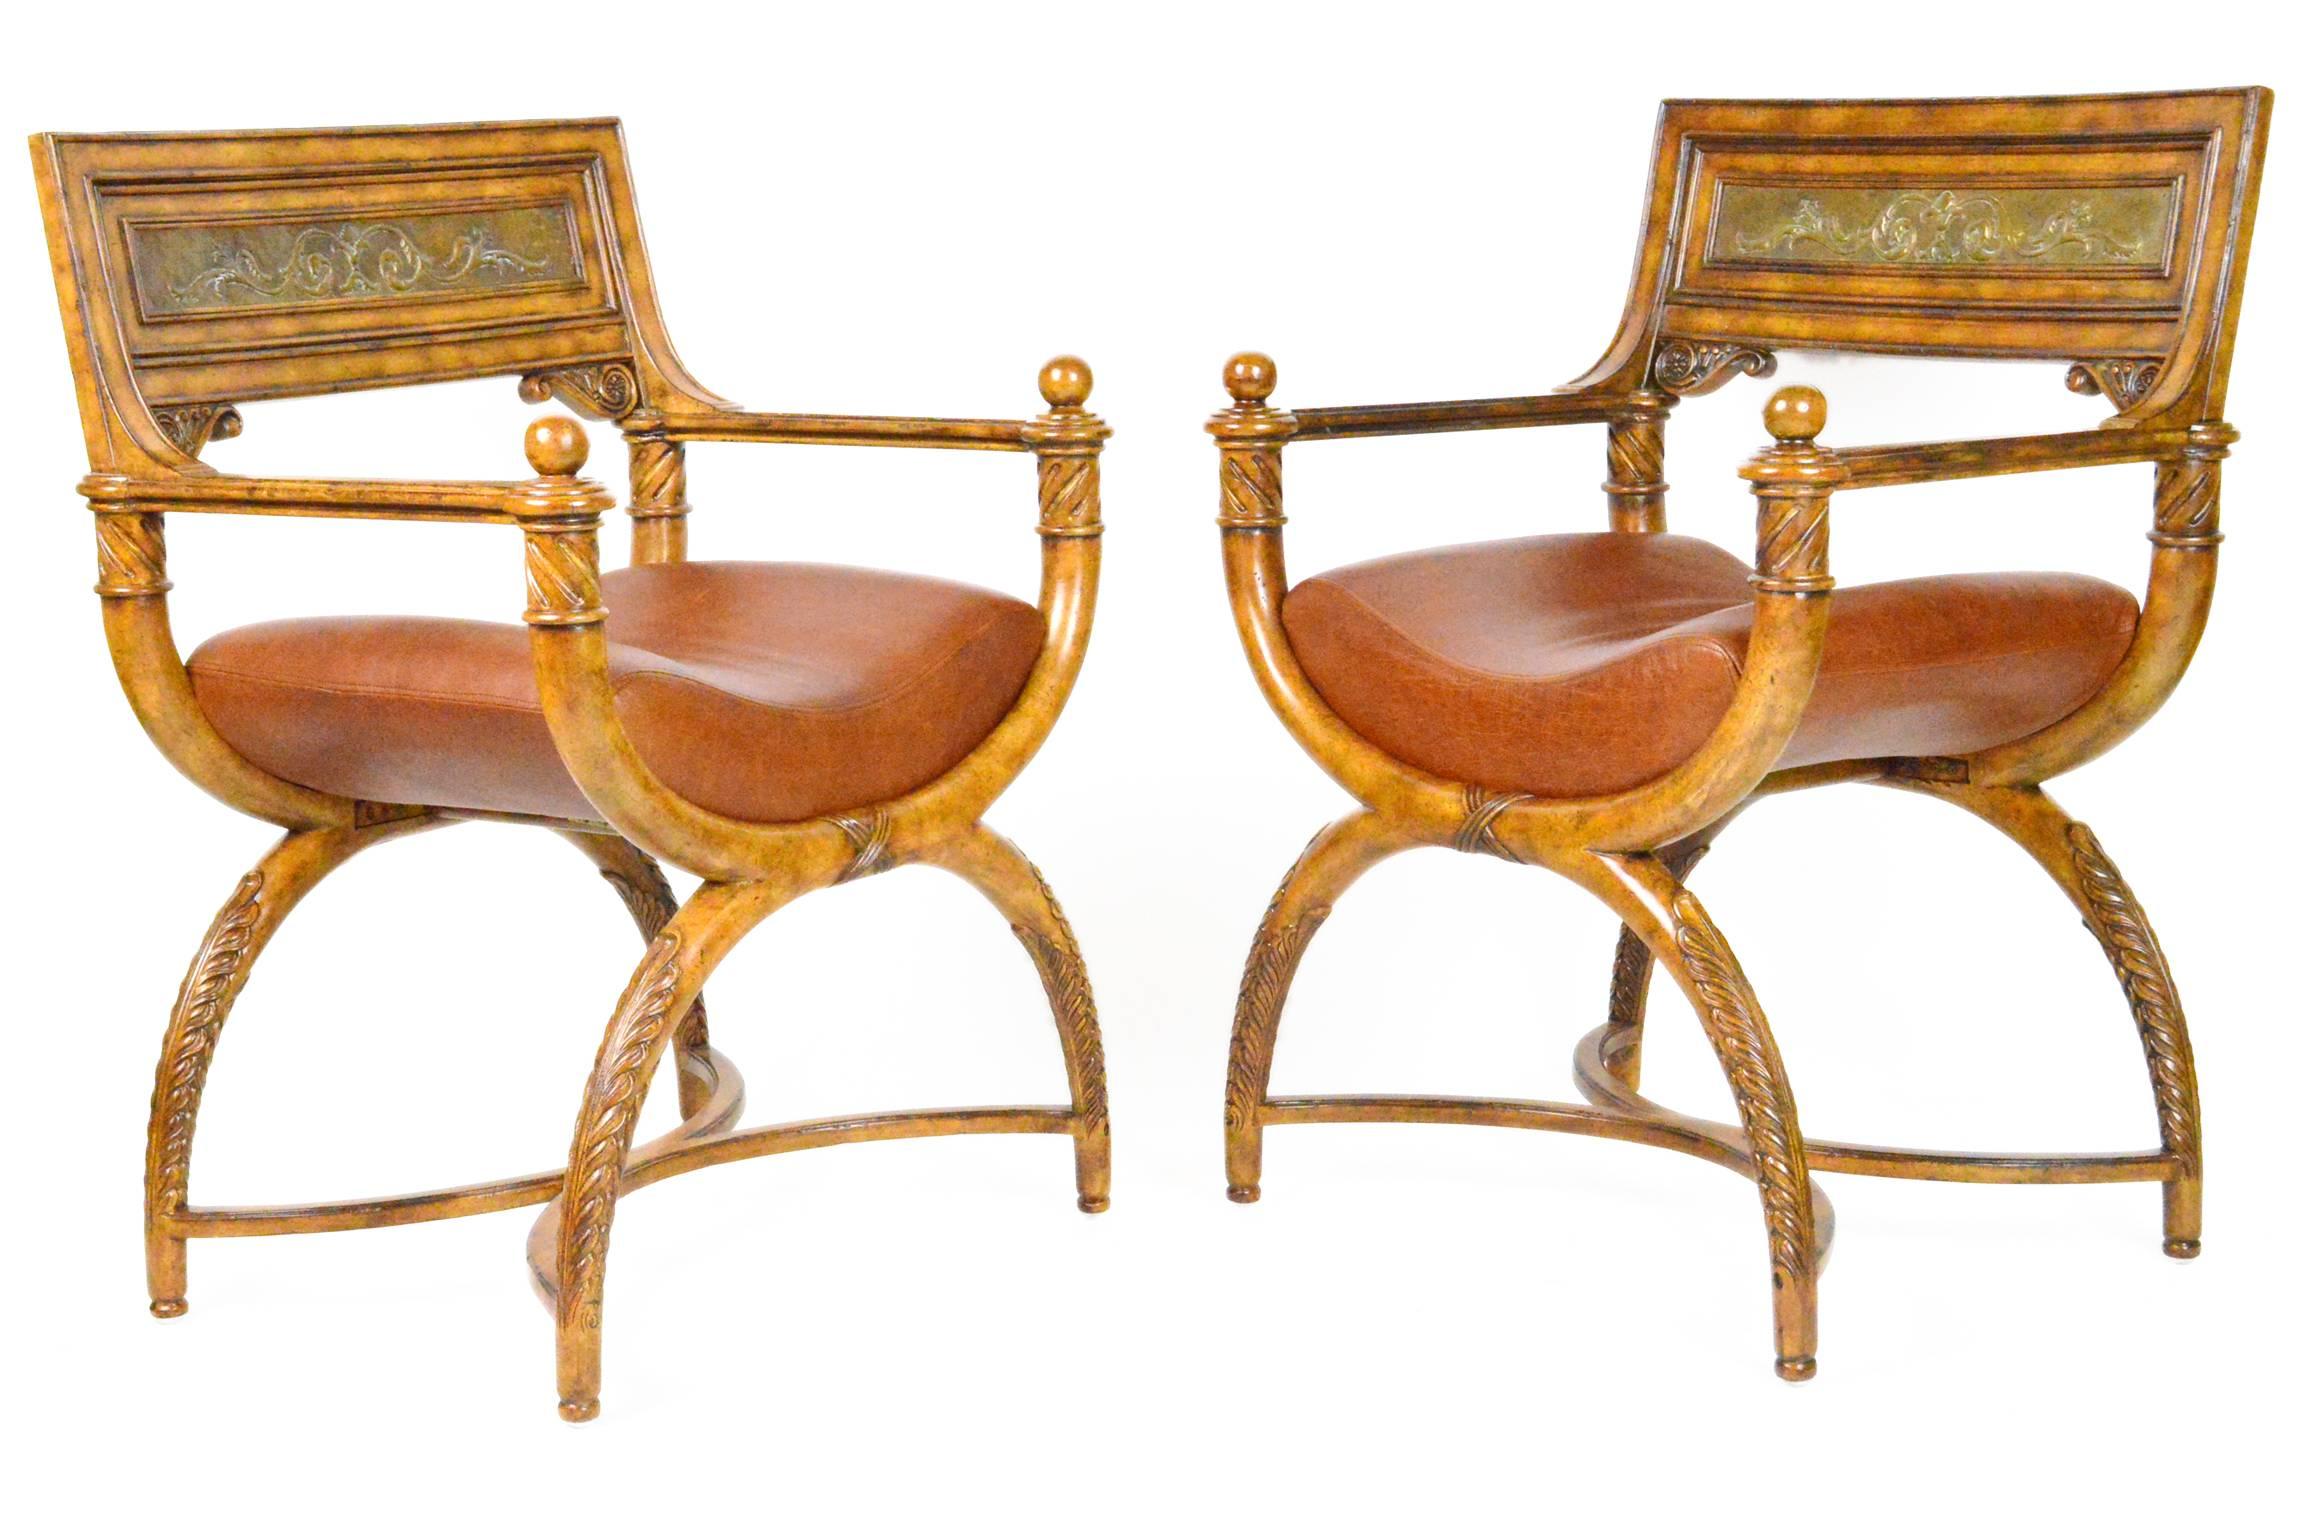 Pair of Savonarola style chairs with distressed pine finish, inset metal relief back plaque and leather upholstery.
Measures: 26.25